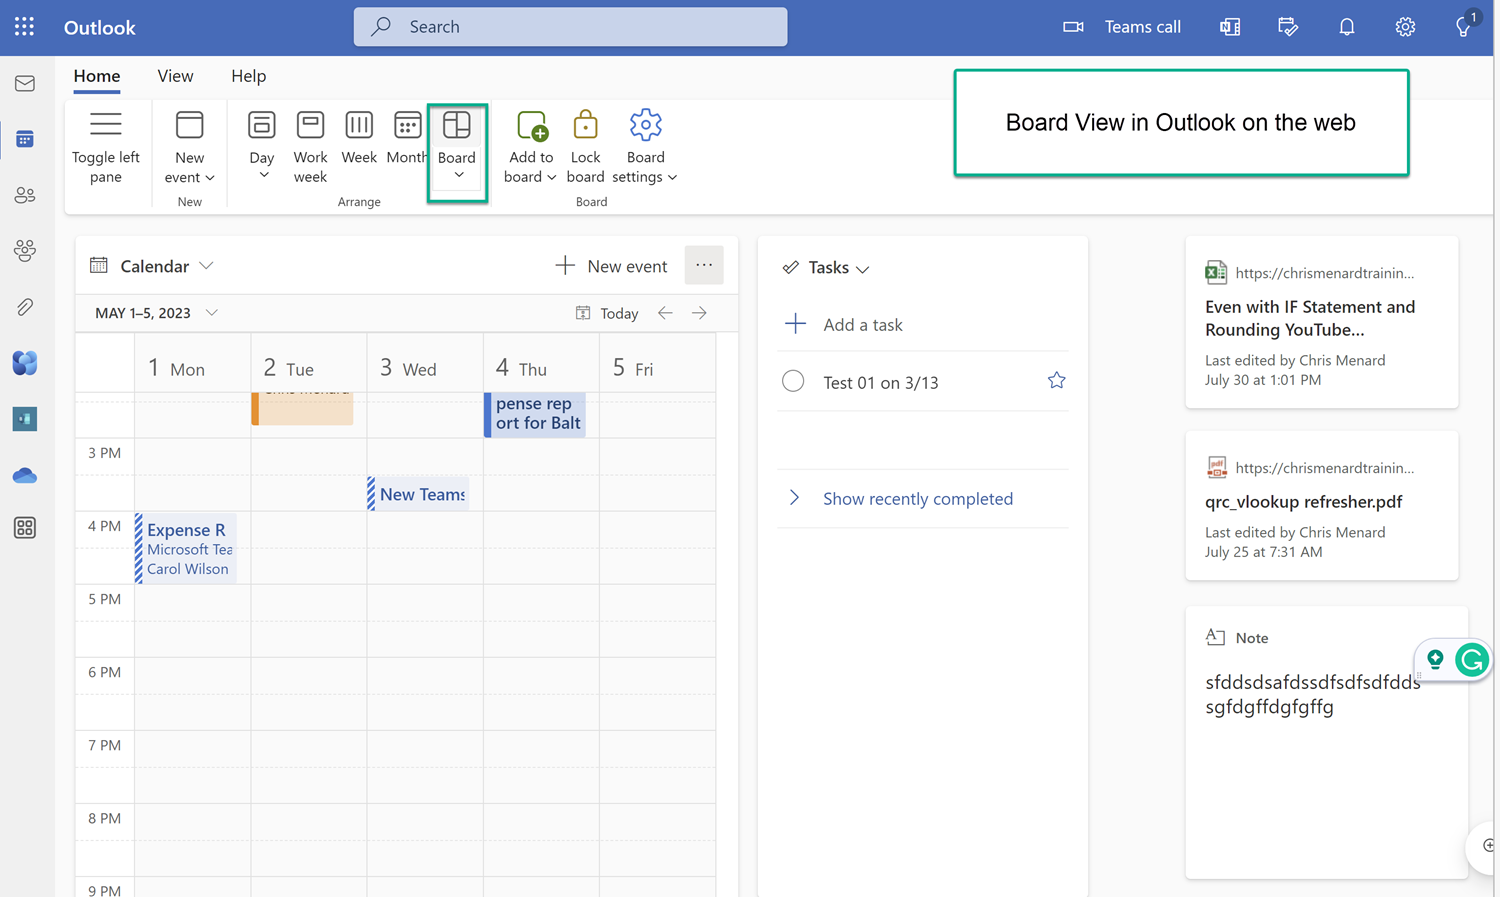 Board View in Outlook on the web